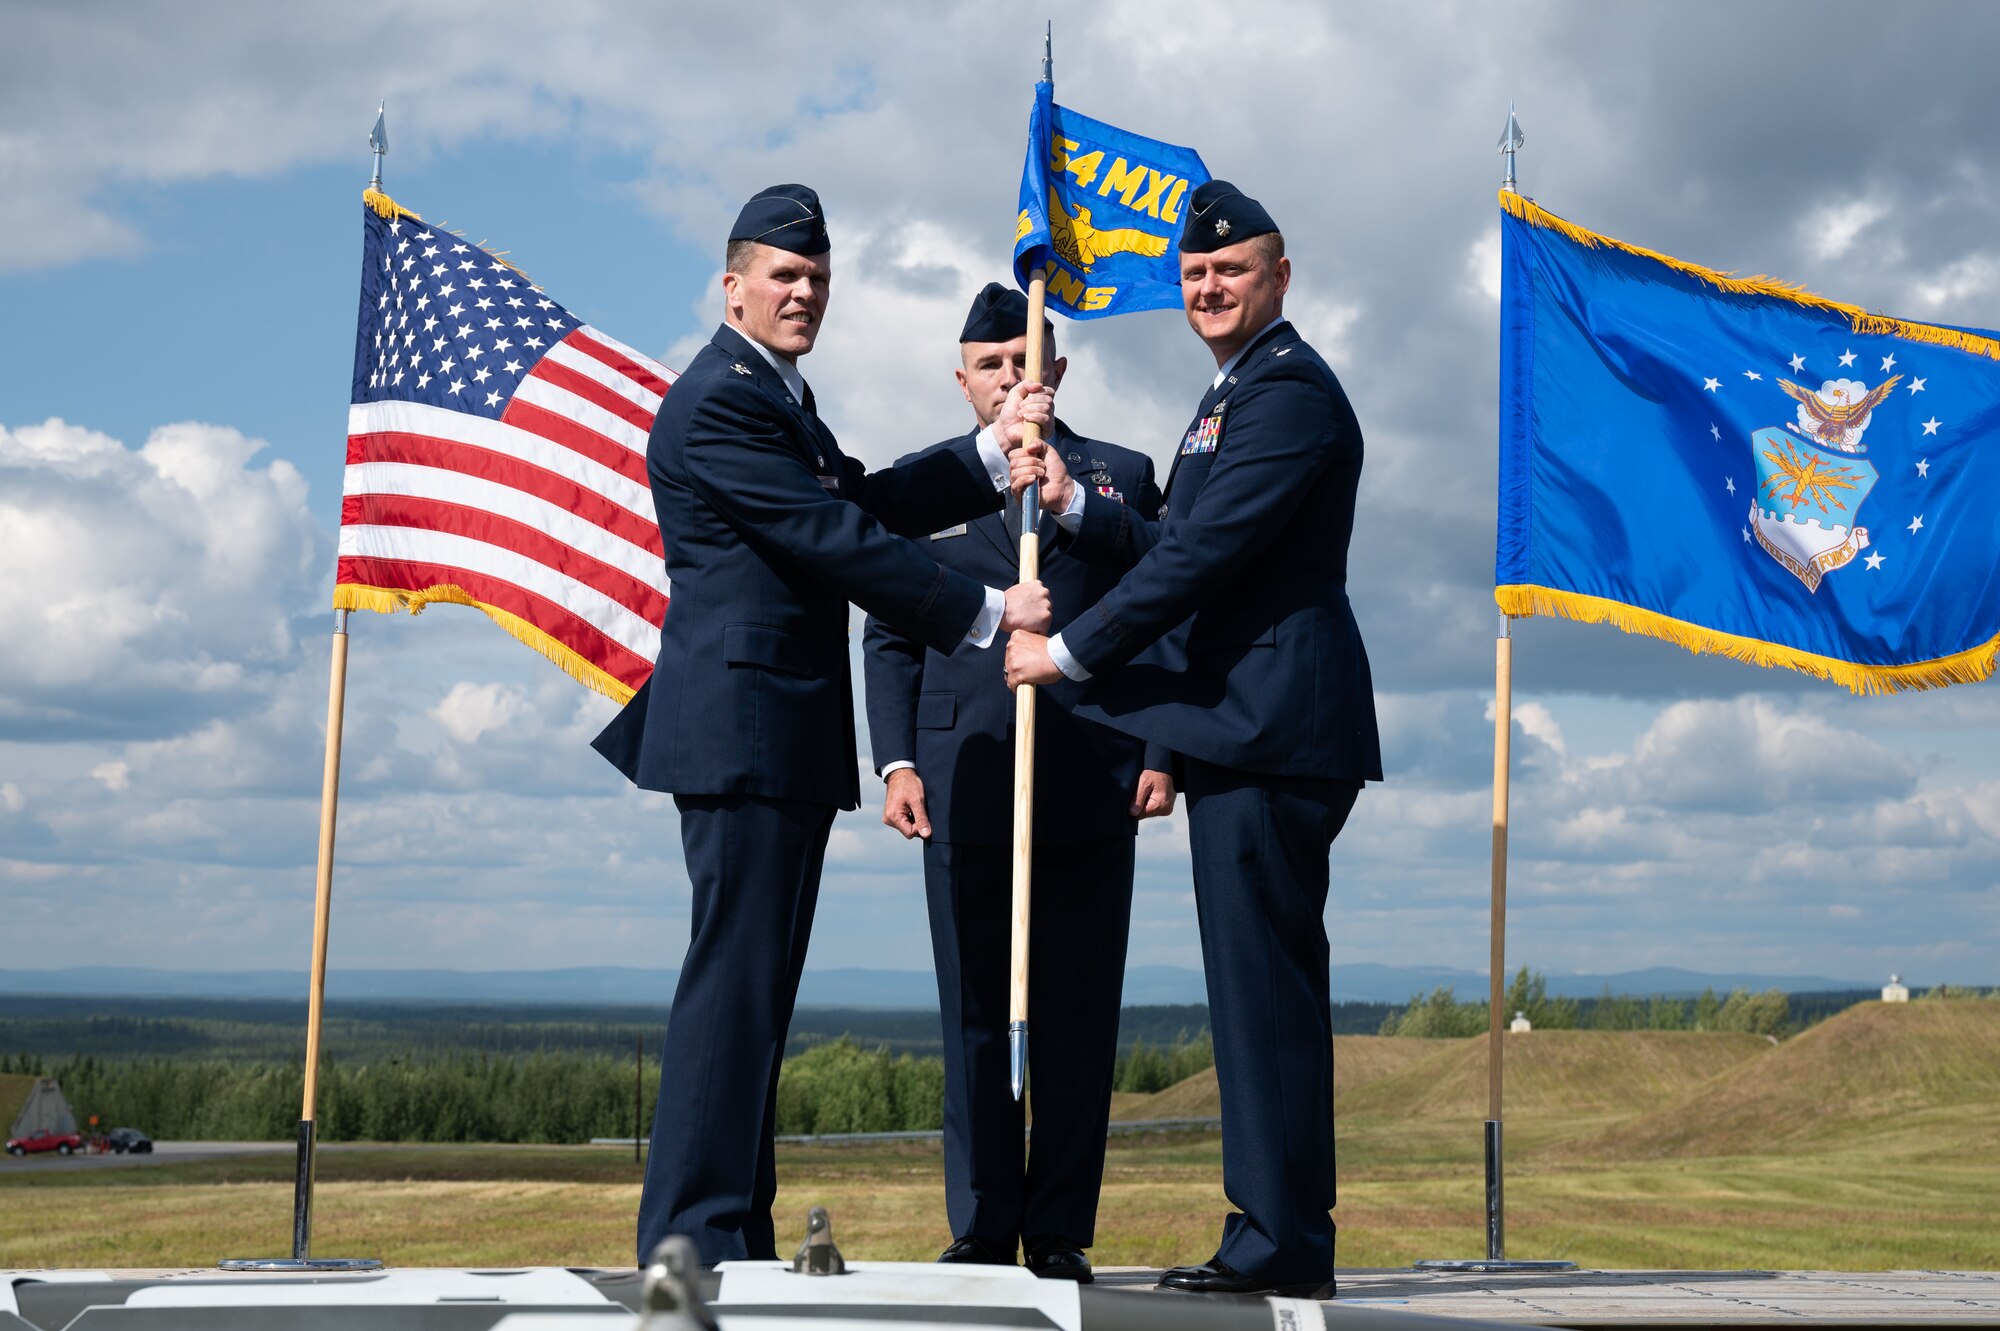 U.S. Air Force Col. Matthew Powell, (left), the 354th Maintenance Group commander, and Lt. Col. Cory Helms, the 354th Munitions Squadron commander, pose for a photo during an assumption of command ceremony on Eielson Air Force Base, Alaska, July 26, 2021.